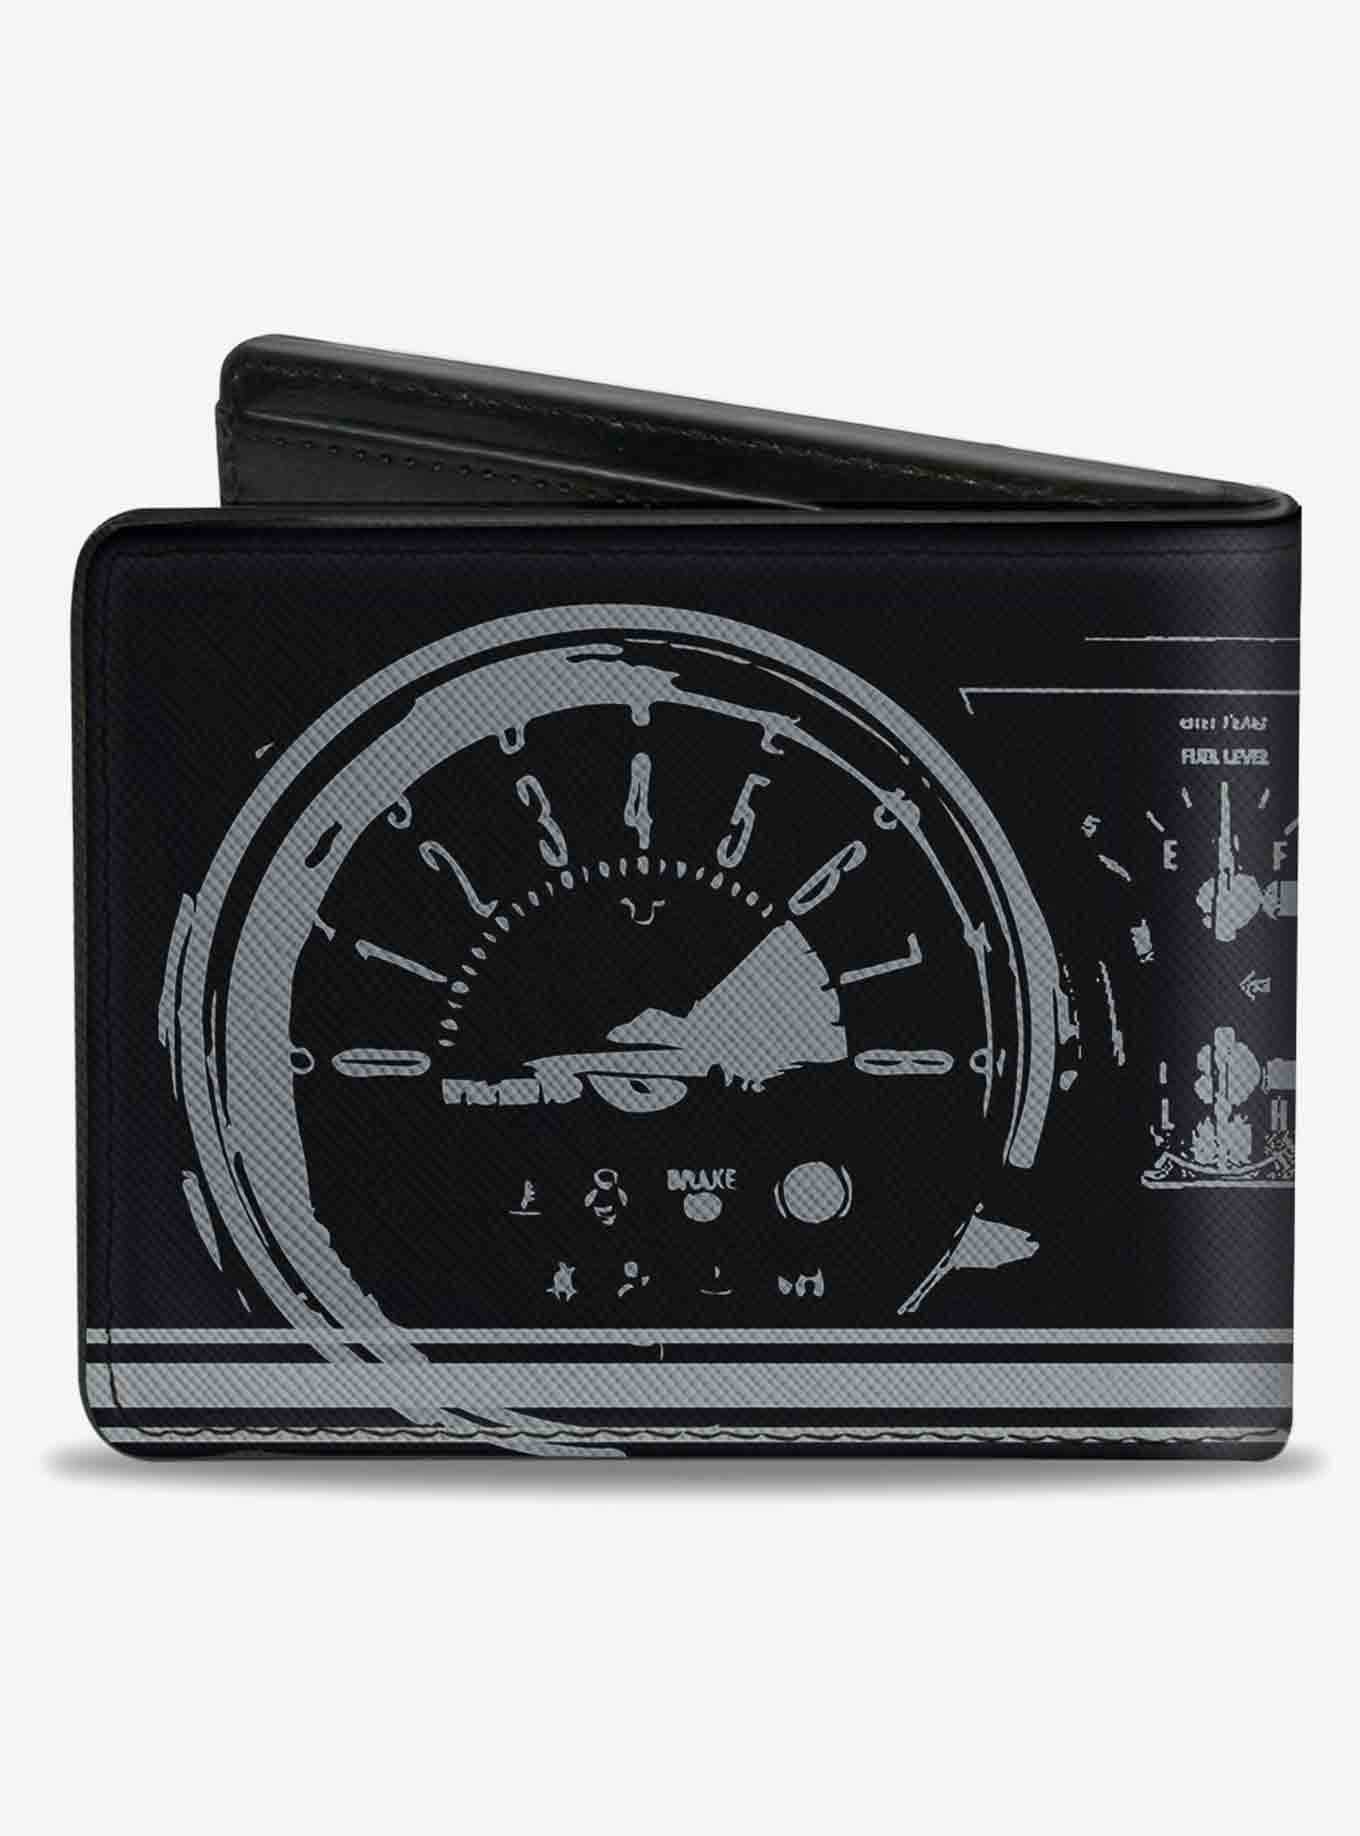 Ford Mustang 1965 Control Panel Bifold Wallet, , hi-res